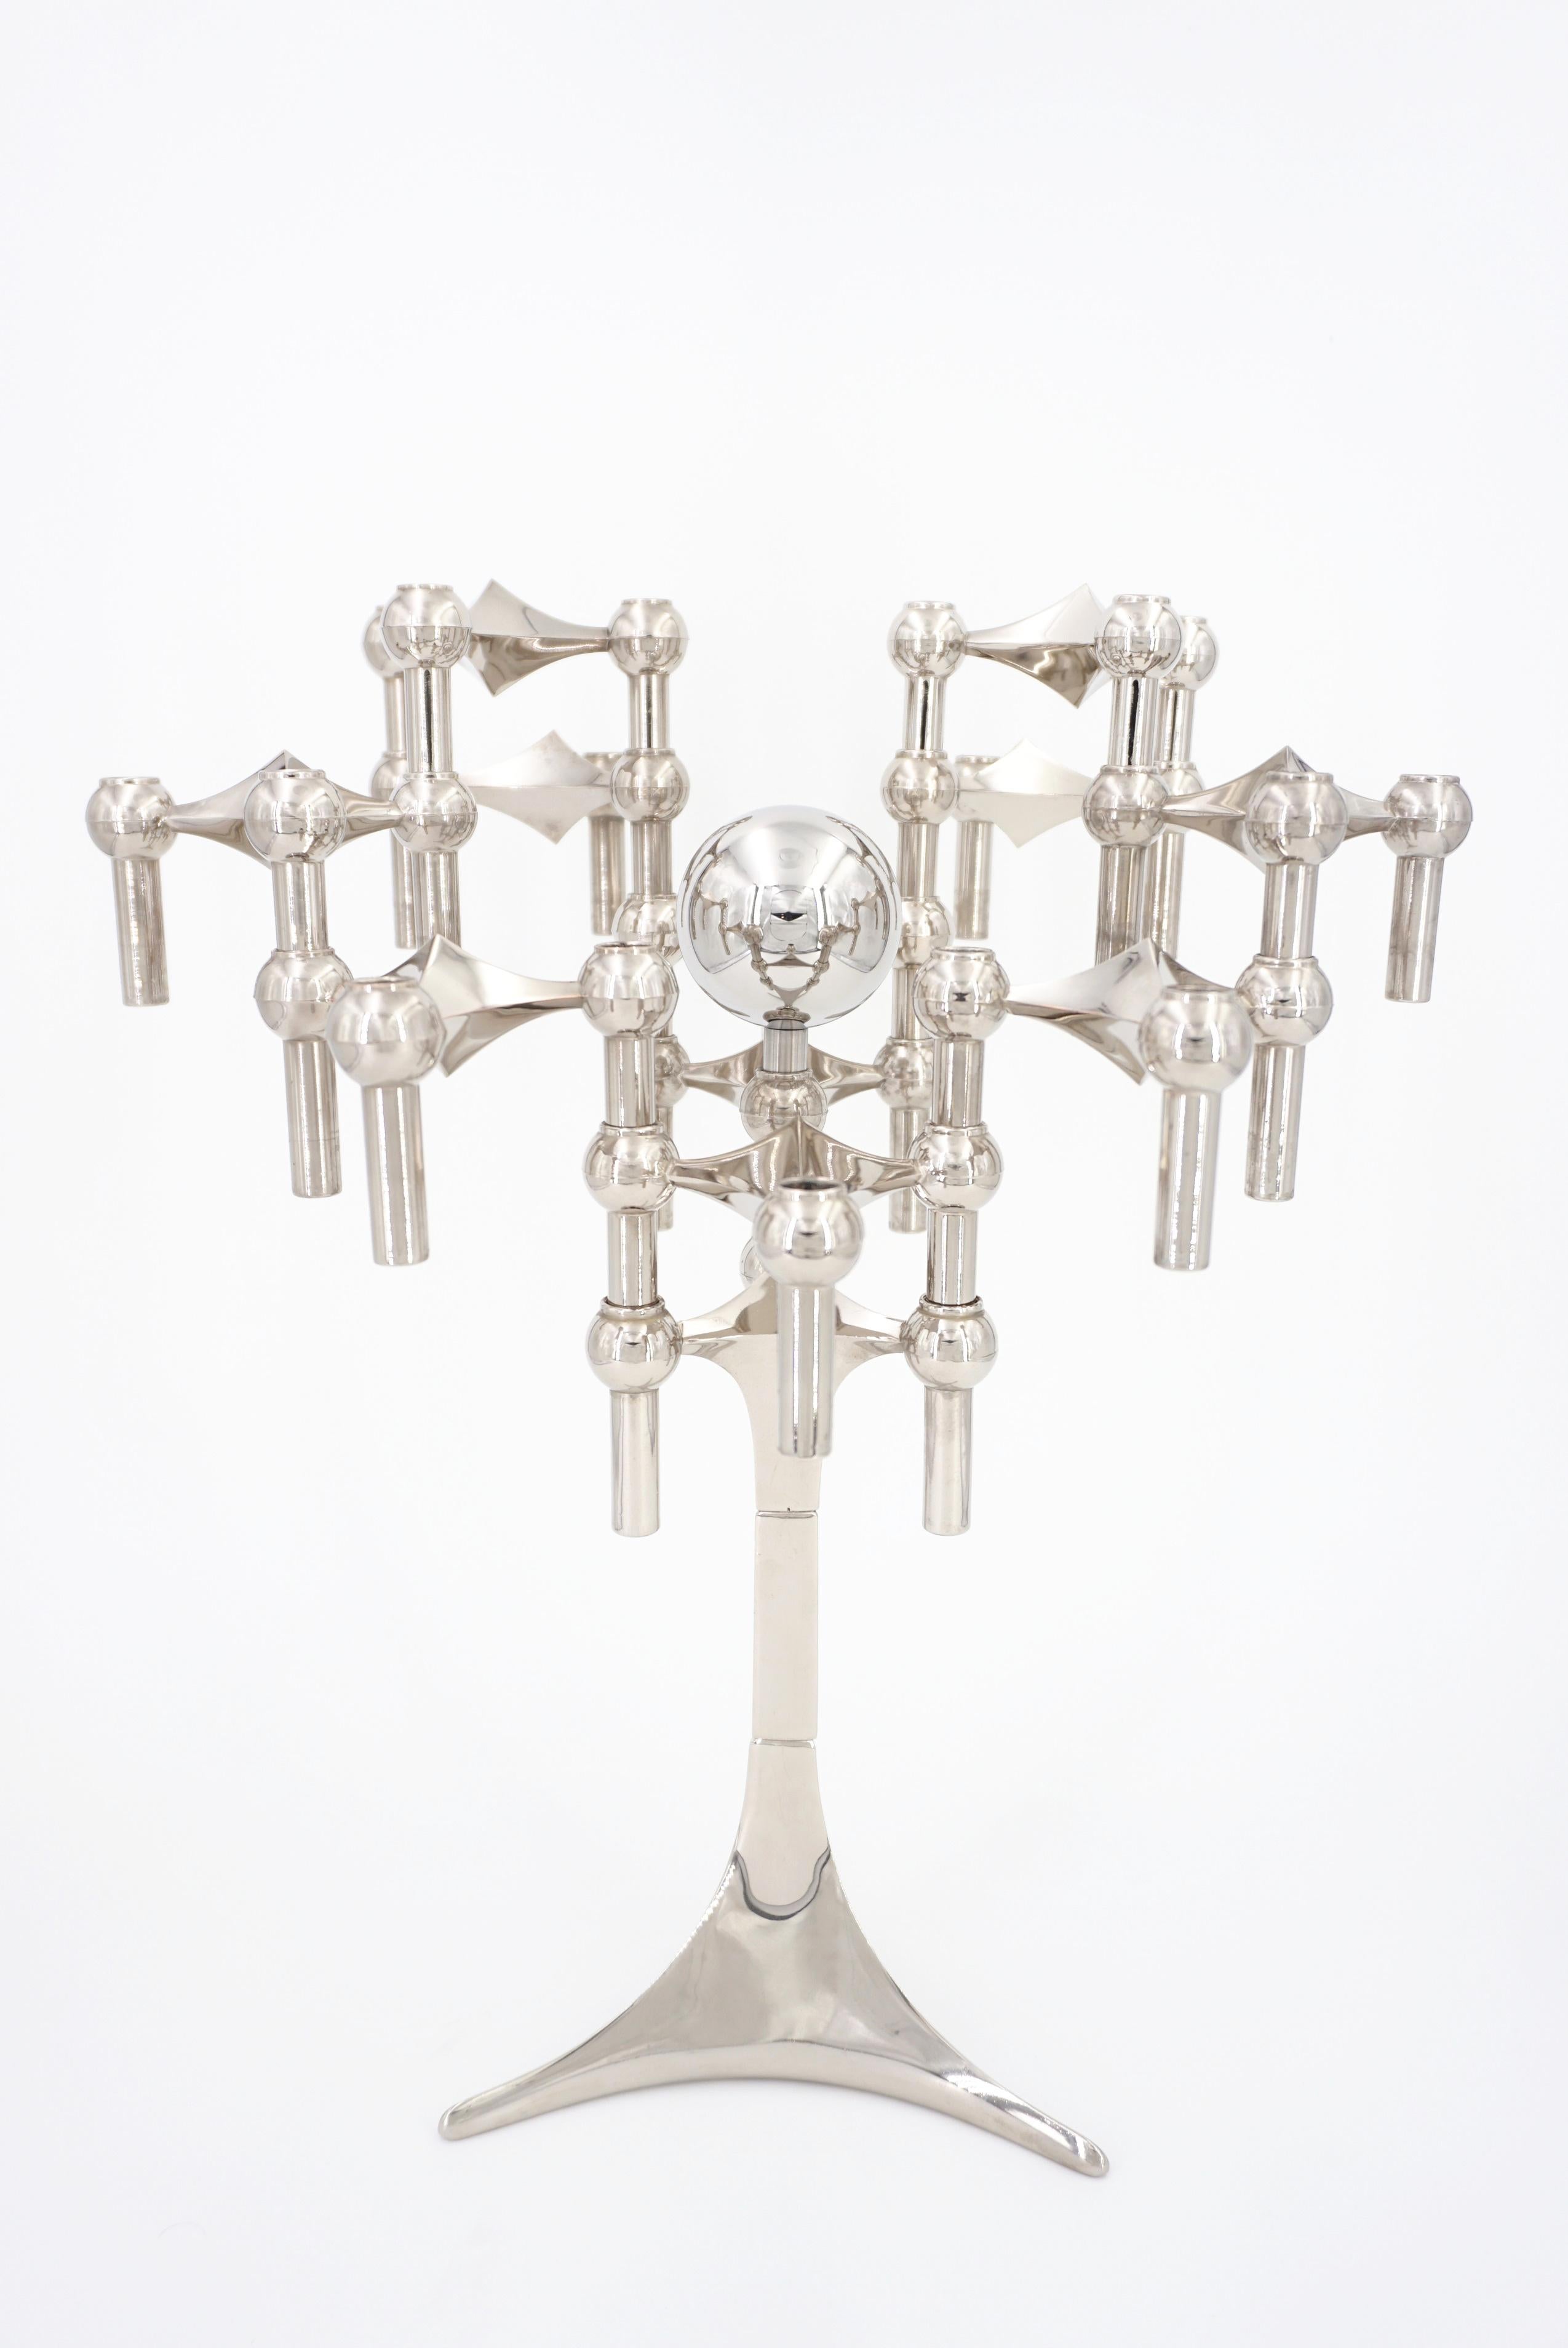 Fritz Nagel 1970s design modular and chrome candleholder set composed of a tripode base, 11 candlesticks in which you could put up to 3 candles and a ball. High quality, amazing and highly decorative, infinitely modular, once you start the